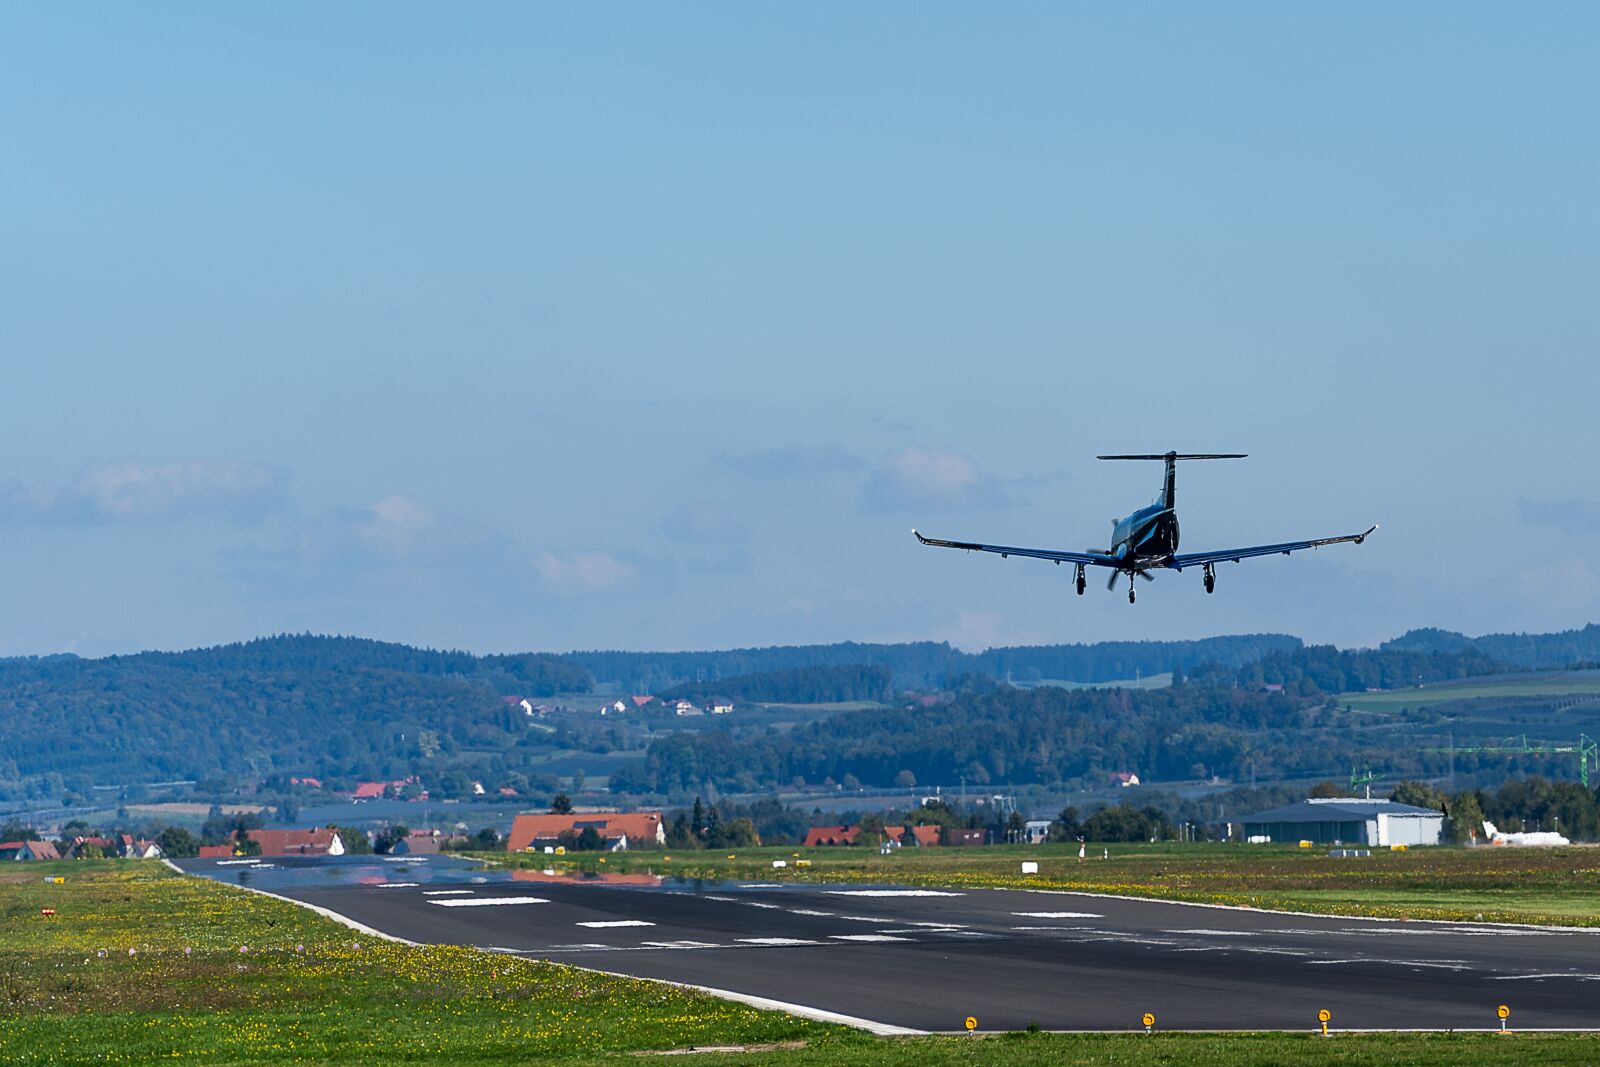 Sony a7 III sample photo. Aircraft, landing, airport photography